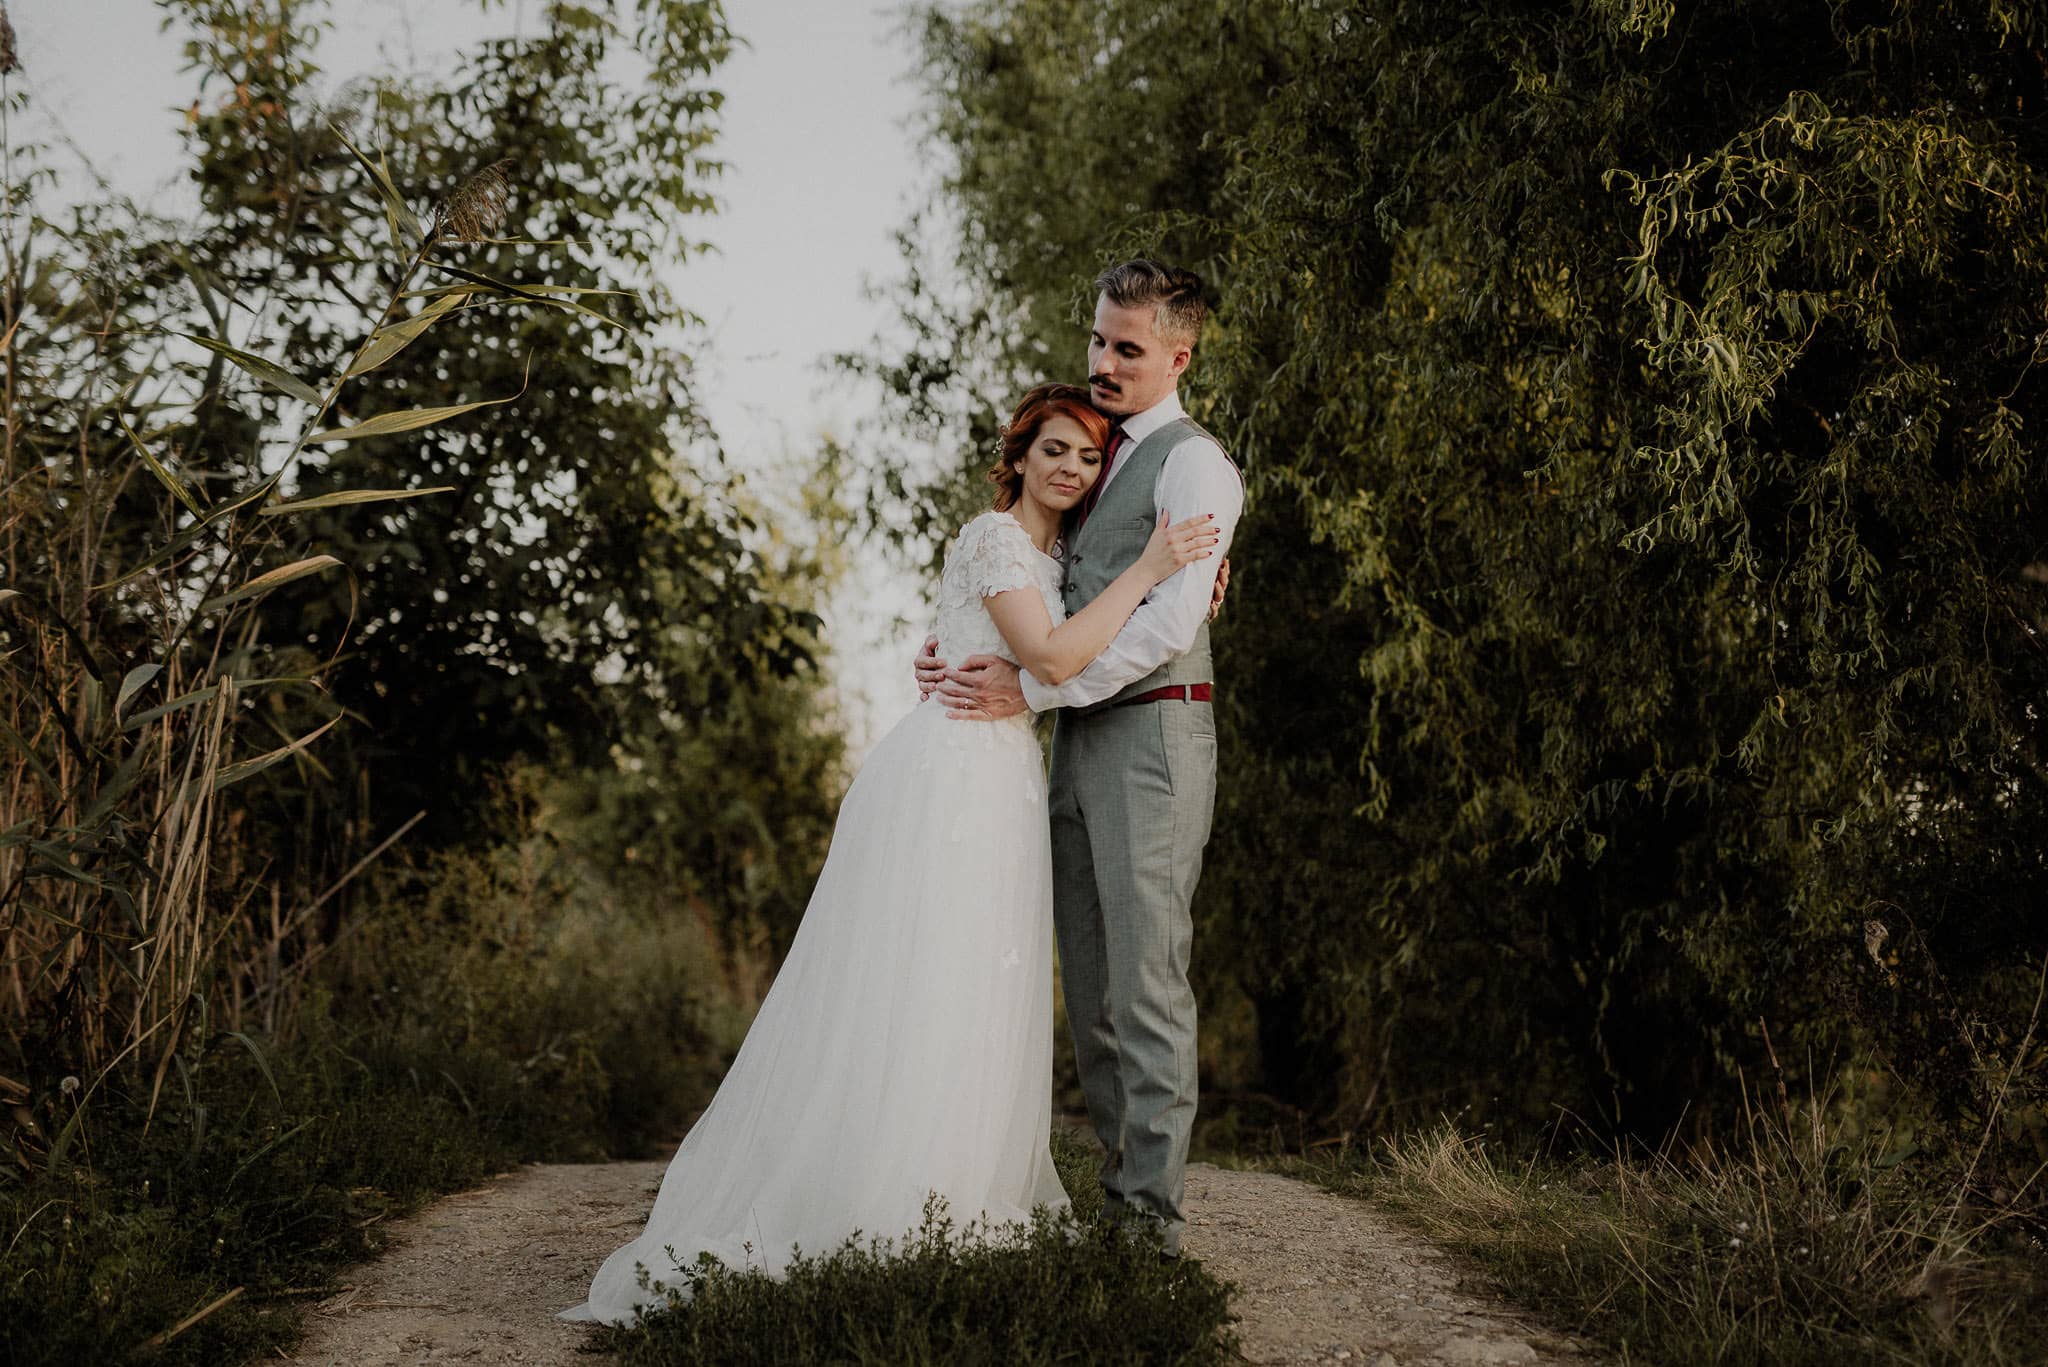 bride and groom share an intimate moment surrounded by nature